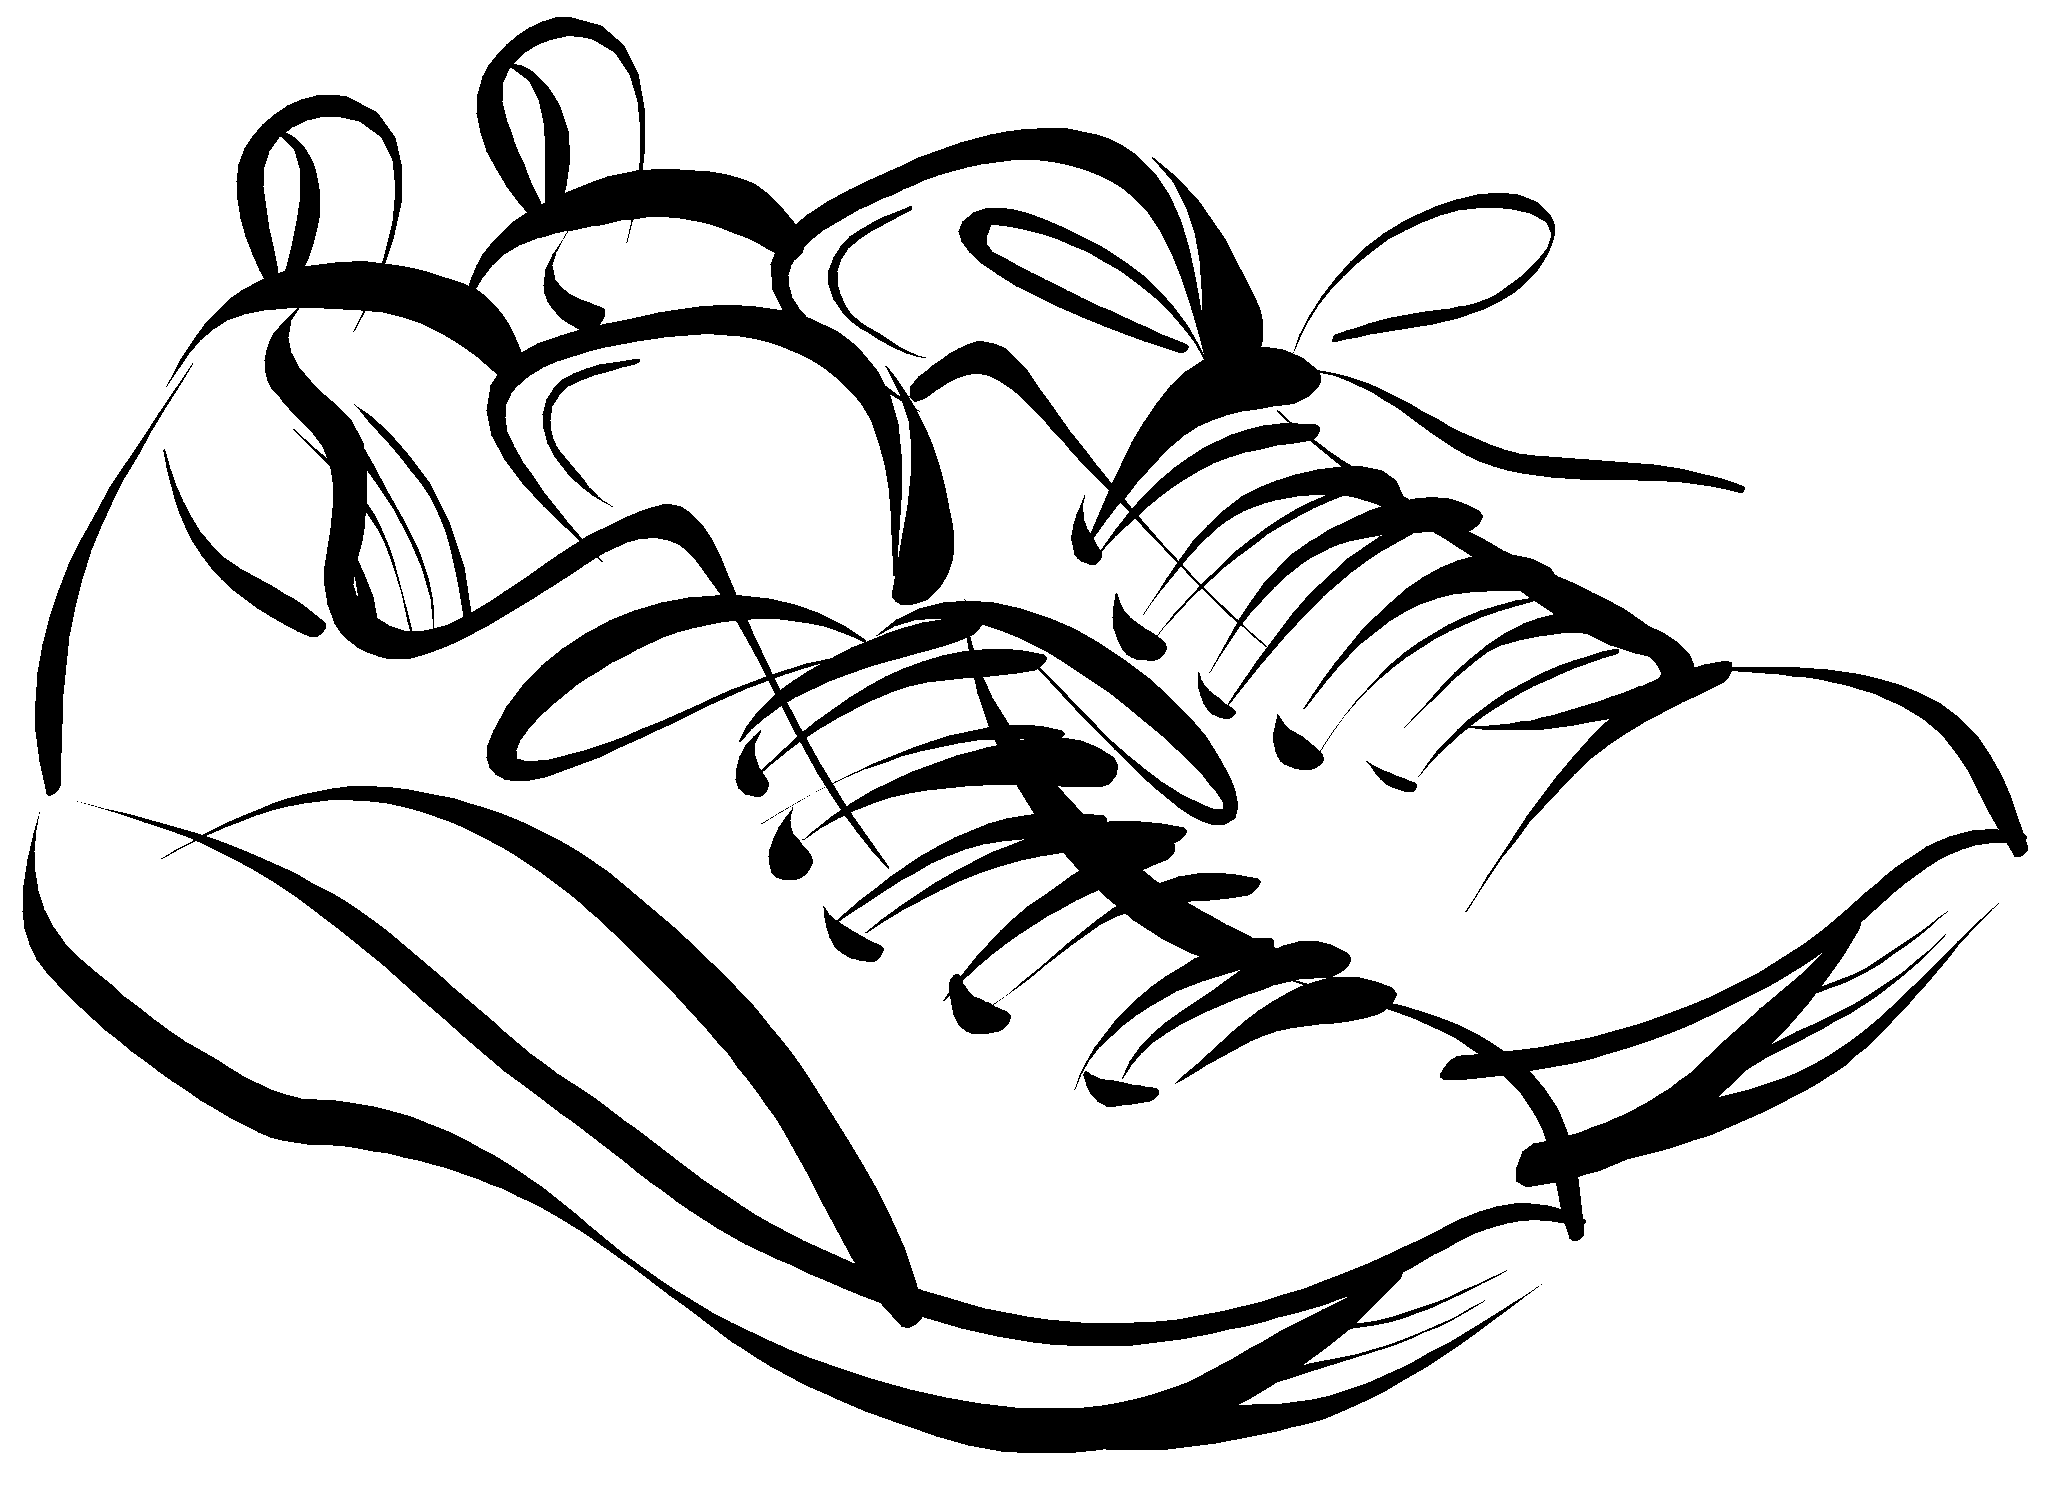 Free Shoe Clipart Pictures